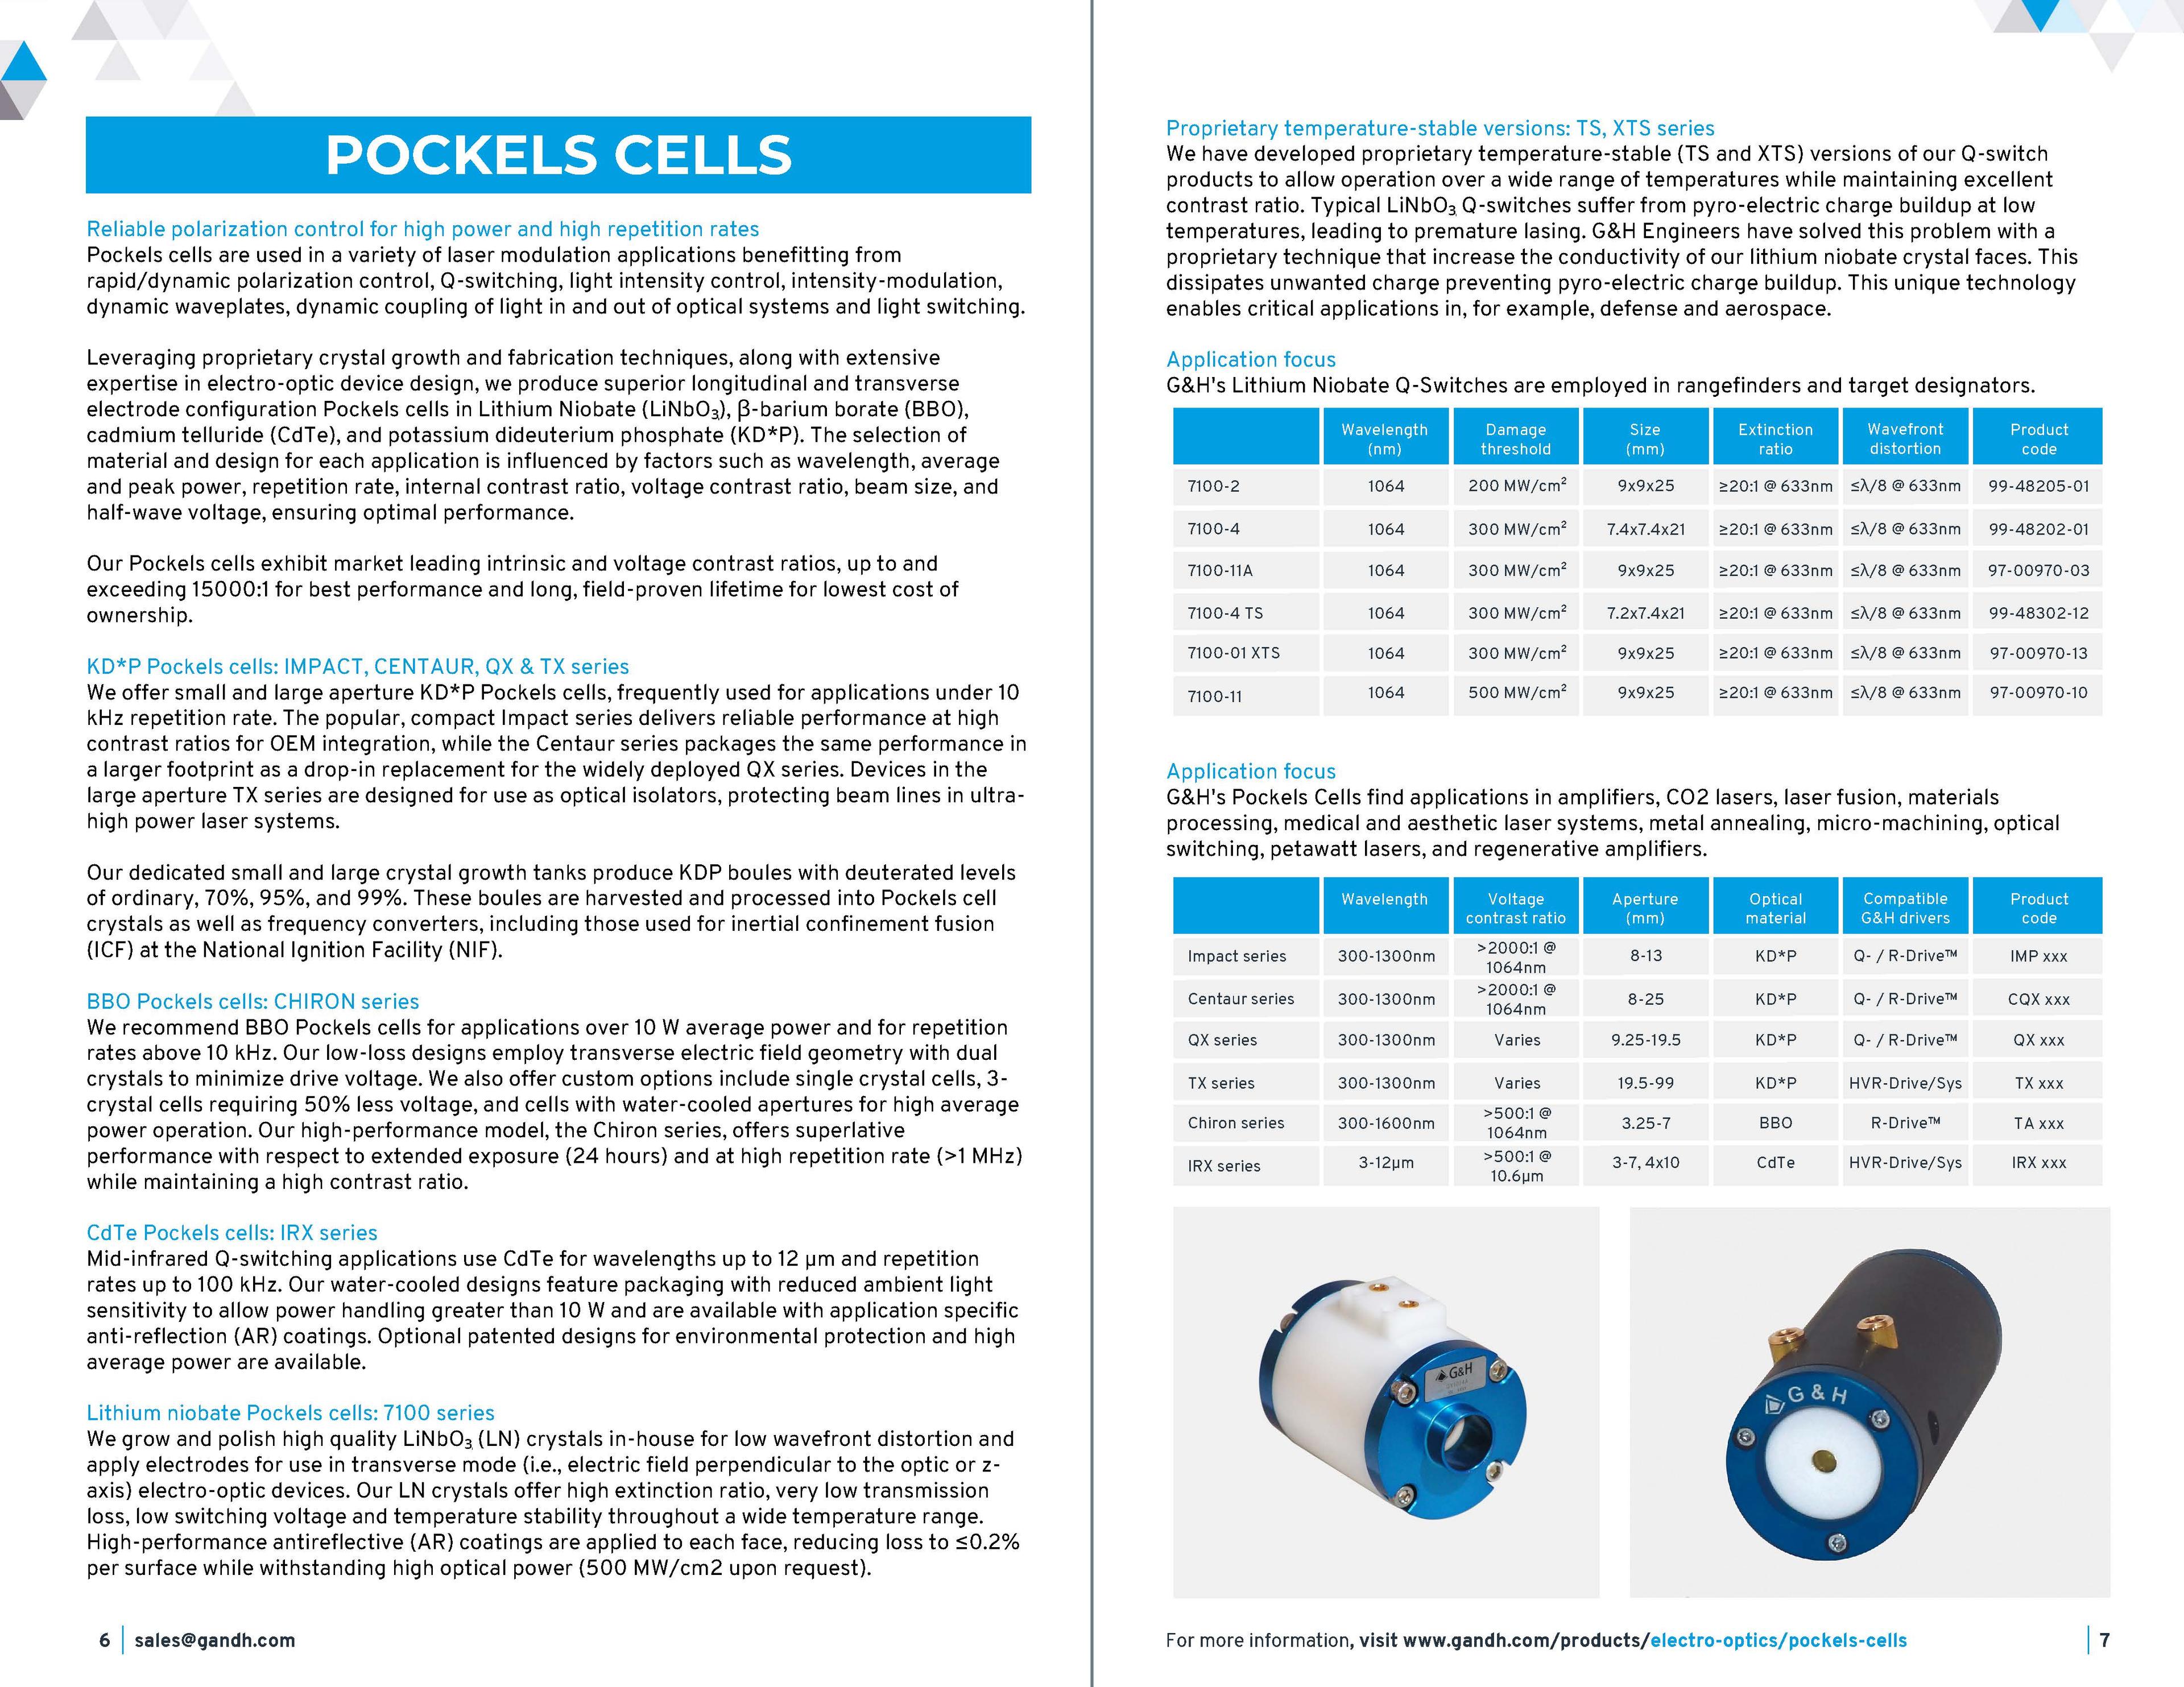 G&H Product & Solutions Guide - Electro-Optics Page 06-07